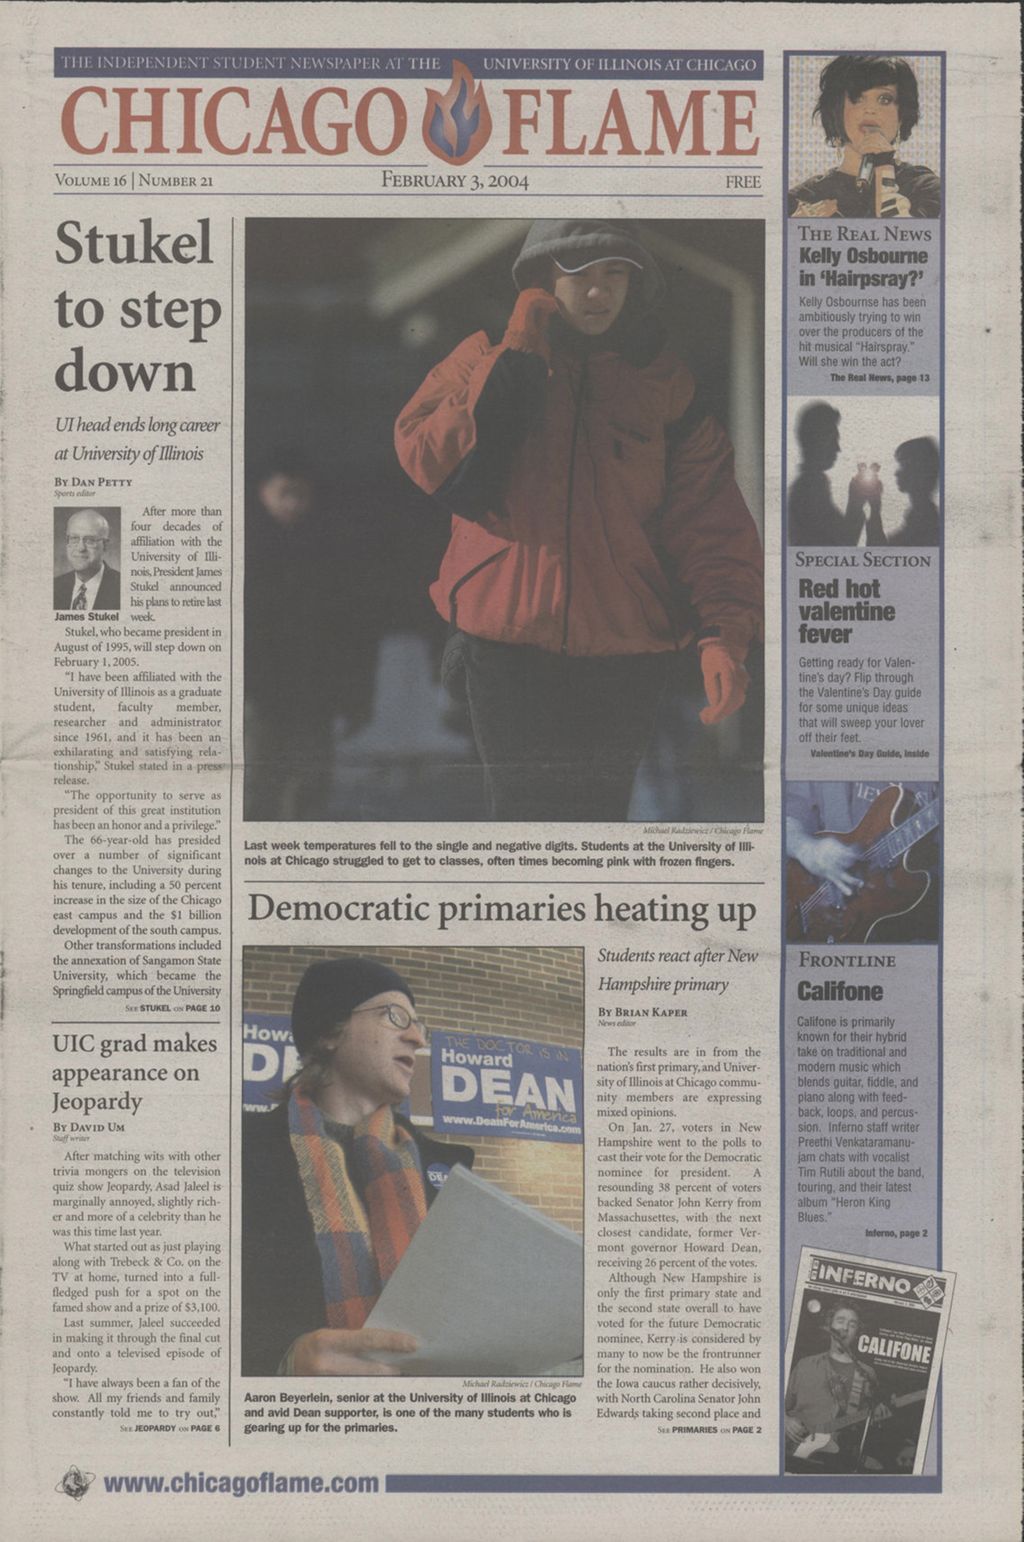 Chicago Flame (February 3, 2004)